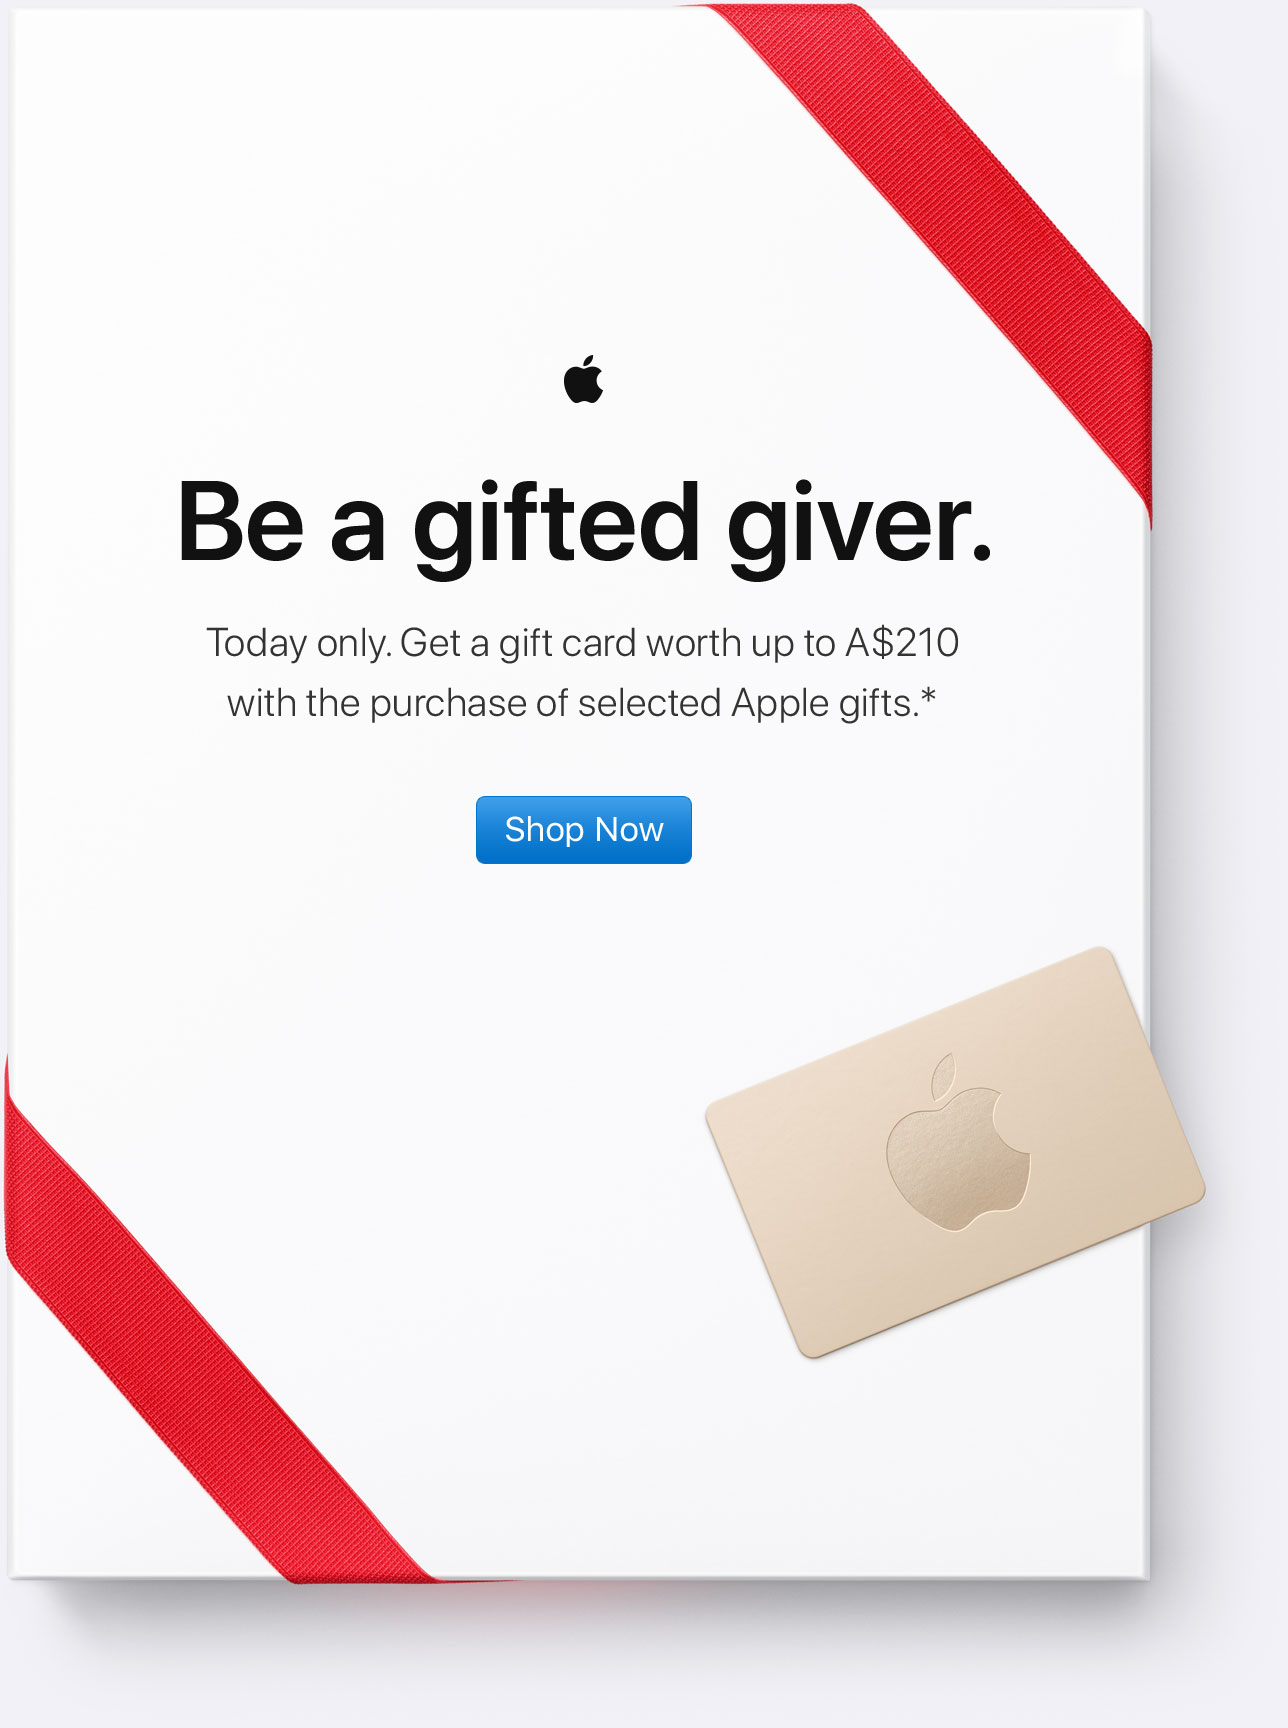 Be a gifted giver. Today only. Get a gift card worth up to A$210 with the purchase of selected Apple gifts.* Shop Now